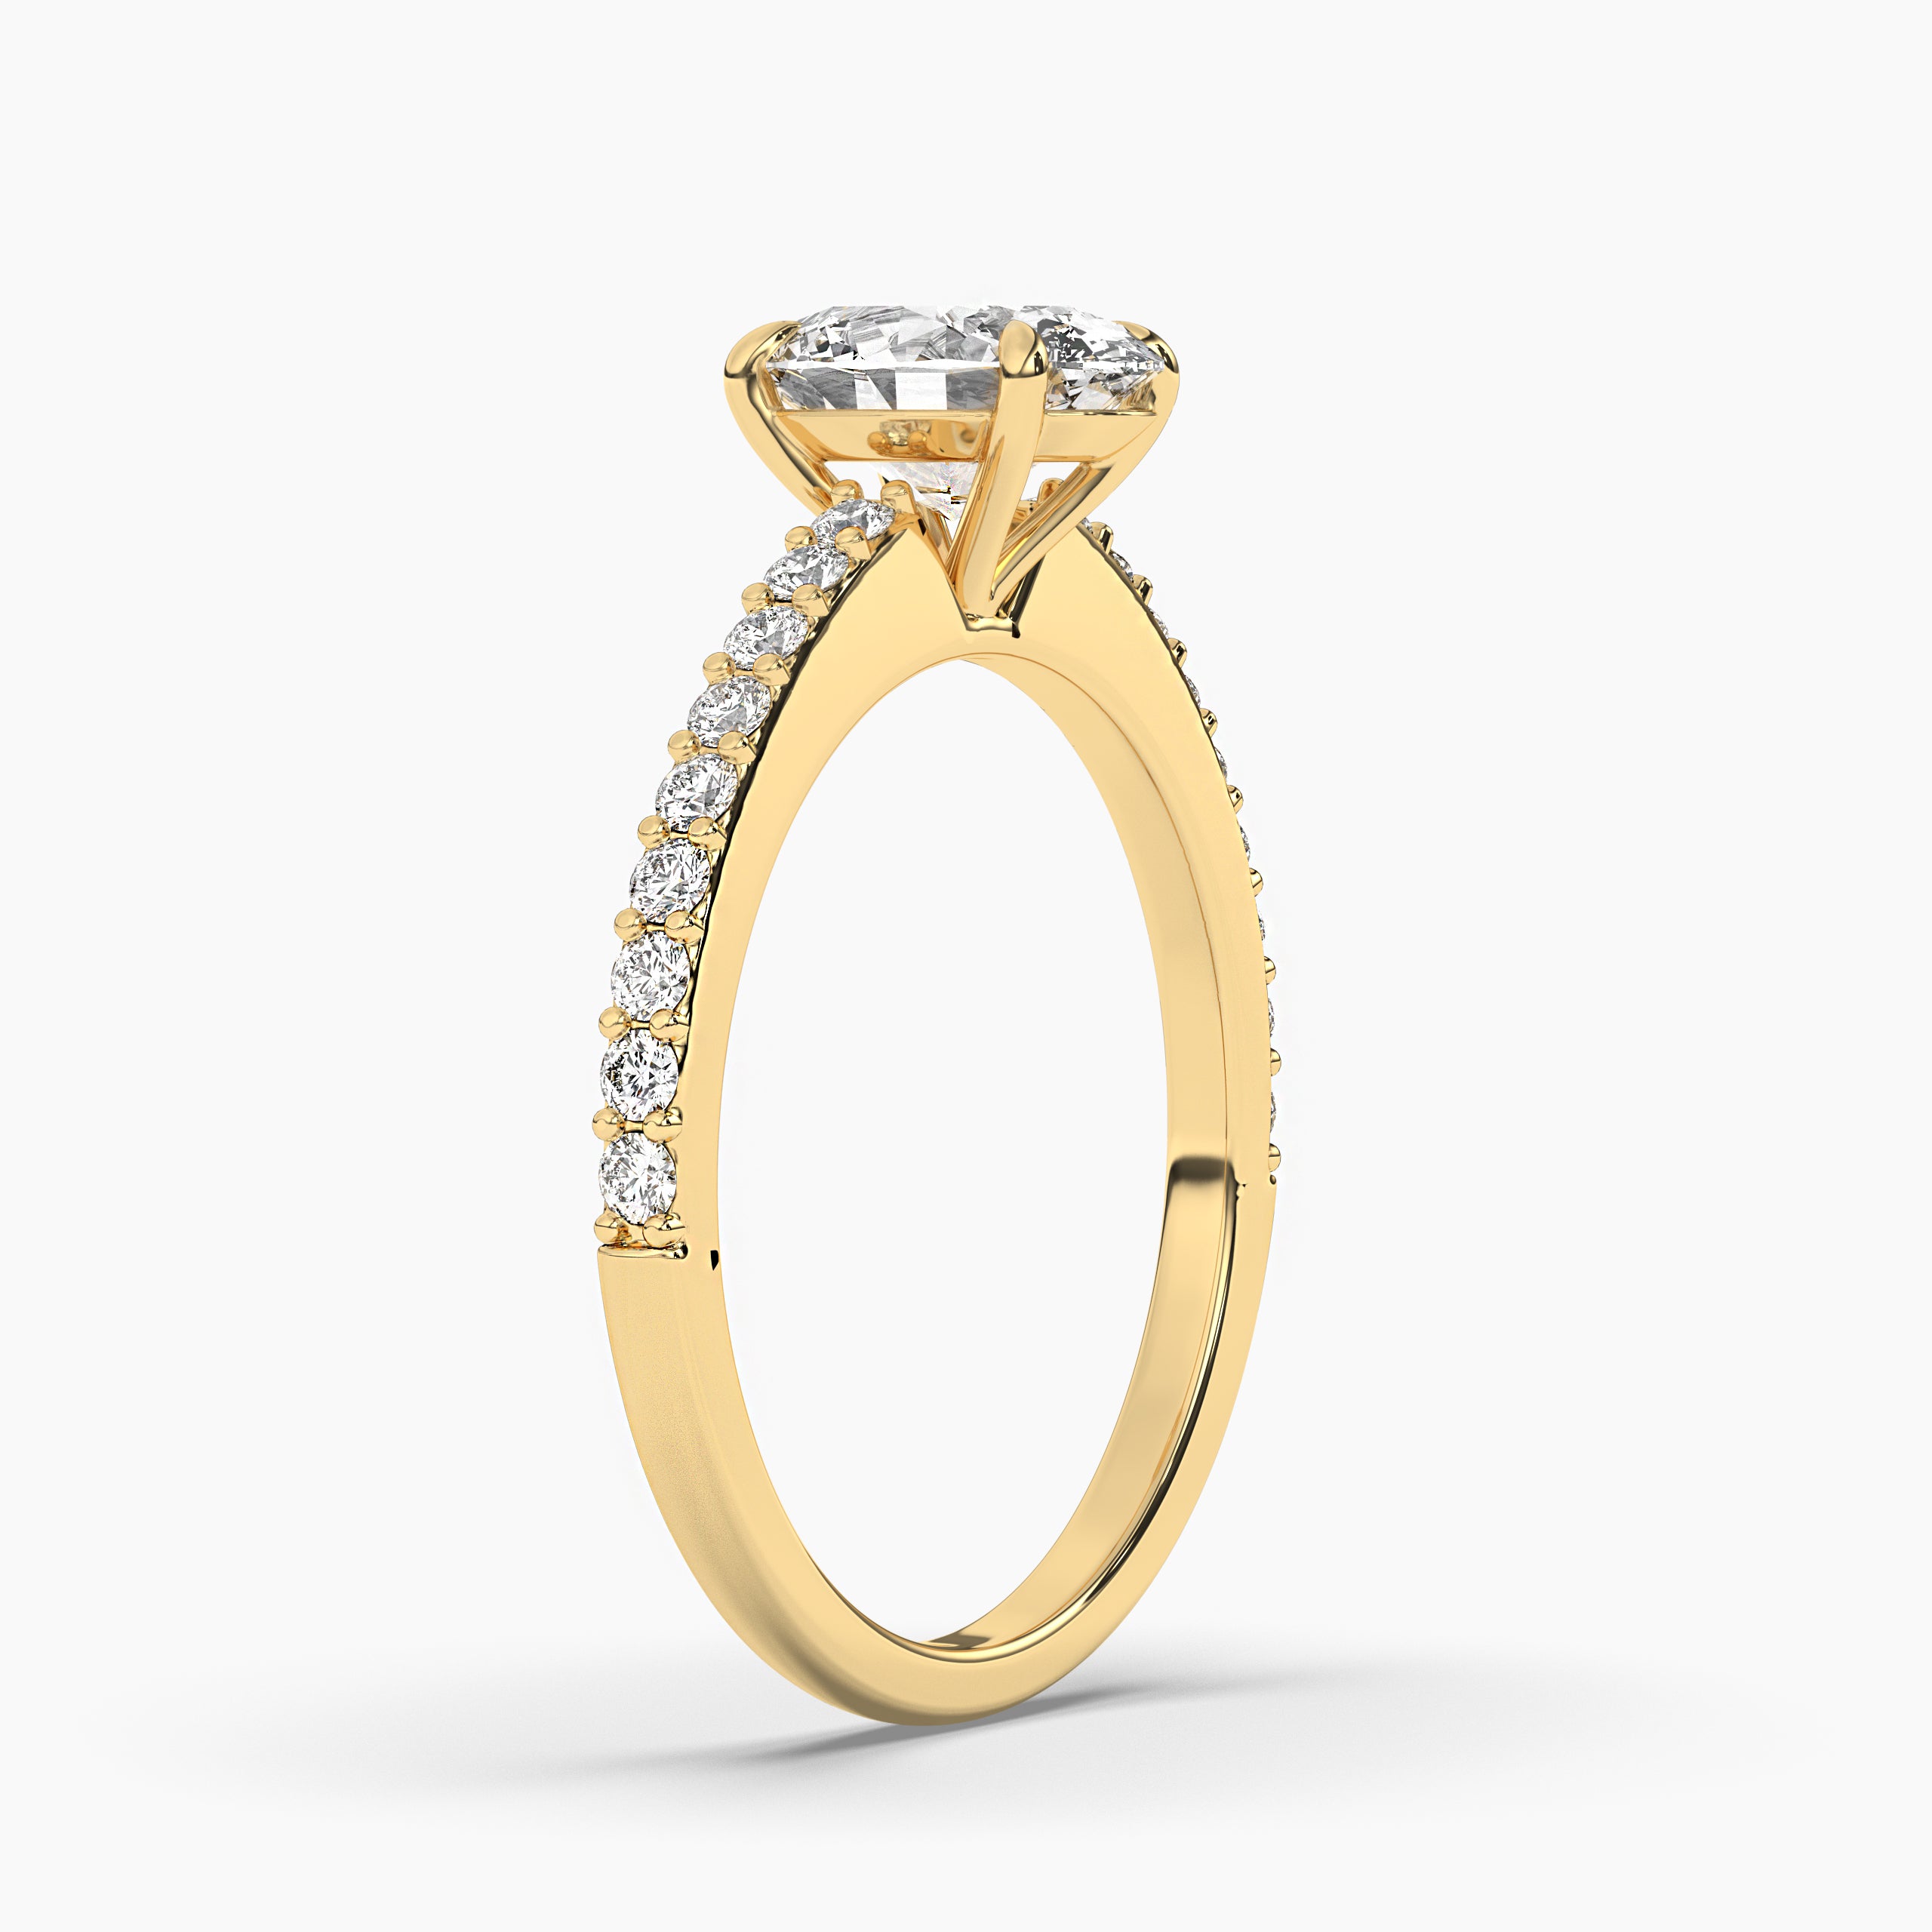 YELLOW GOLD OVAL CUT  PRONGS DIAMOND ENGAGEMENT RING WITH SIDE STONES 